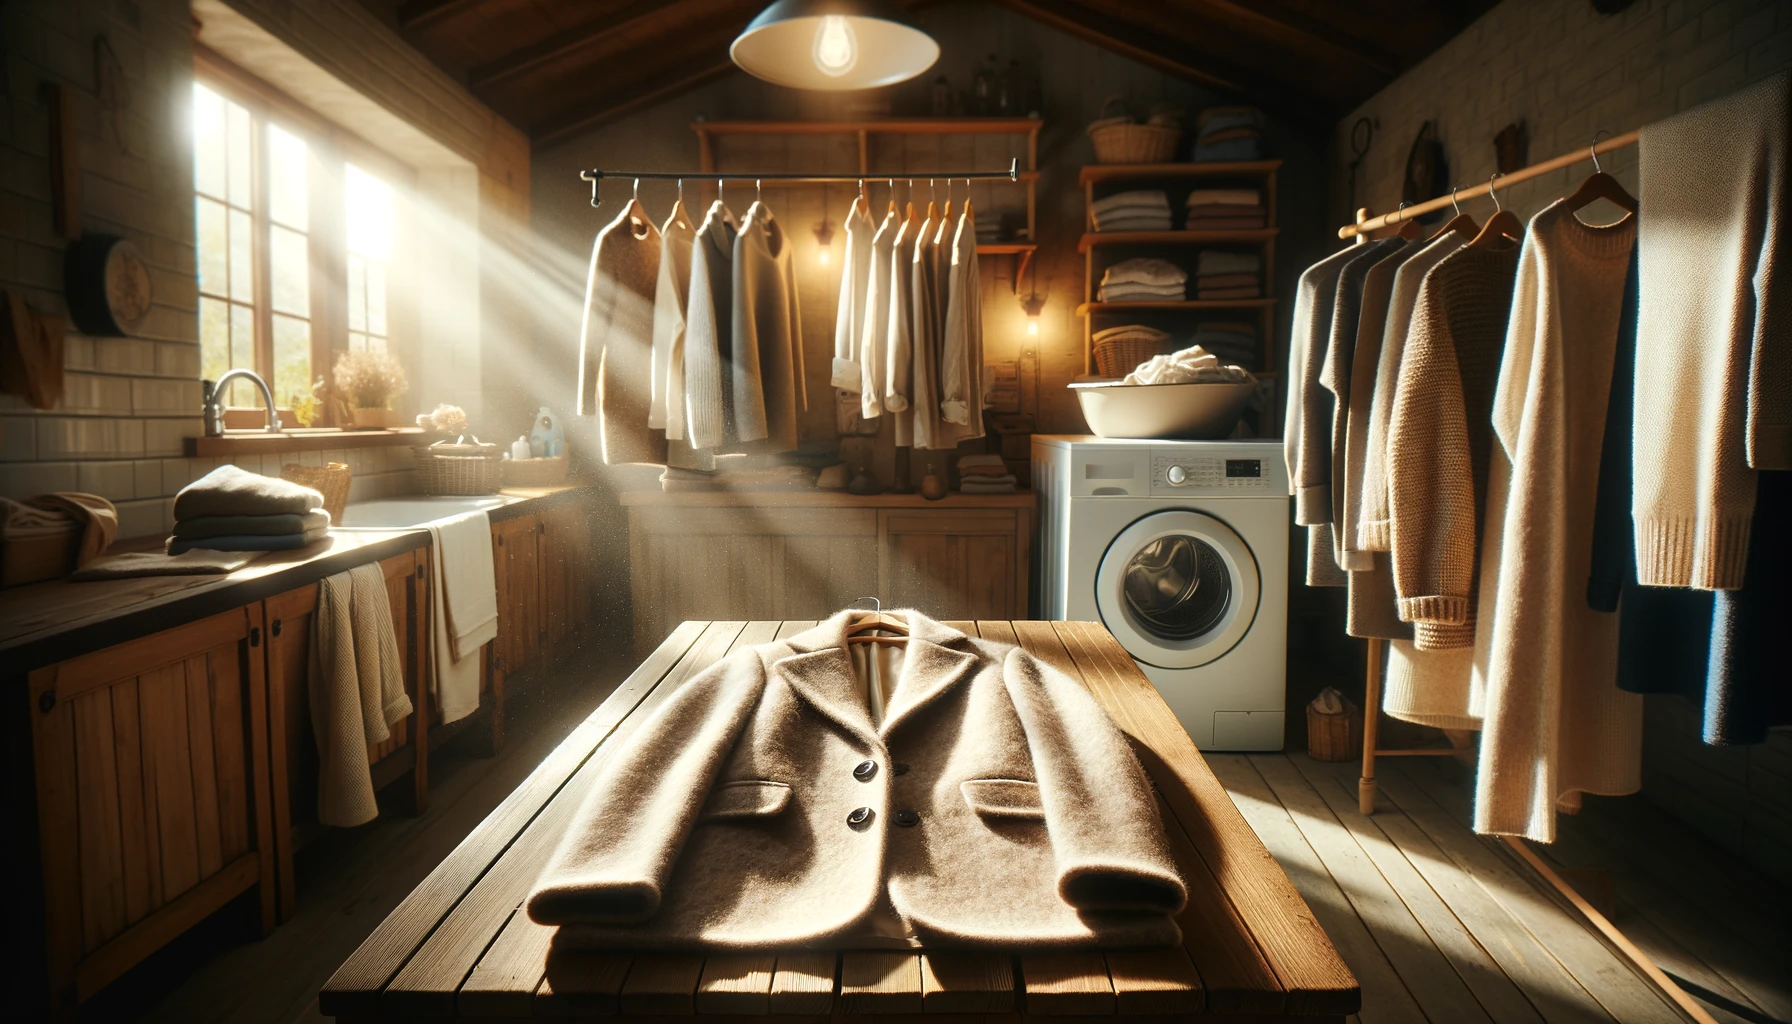 A soft beige wool coat on a wooden table in a sunlit laundry room with rustic charm